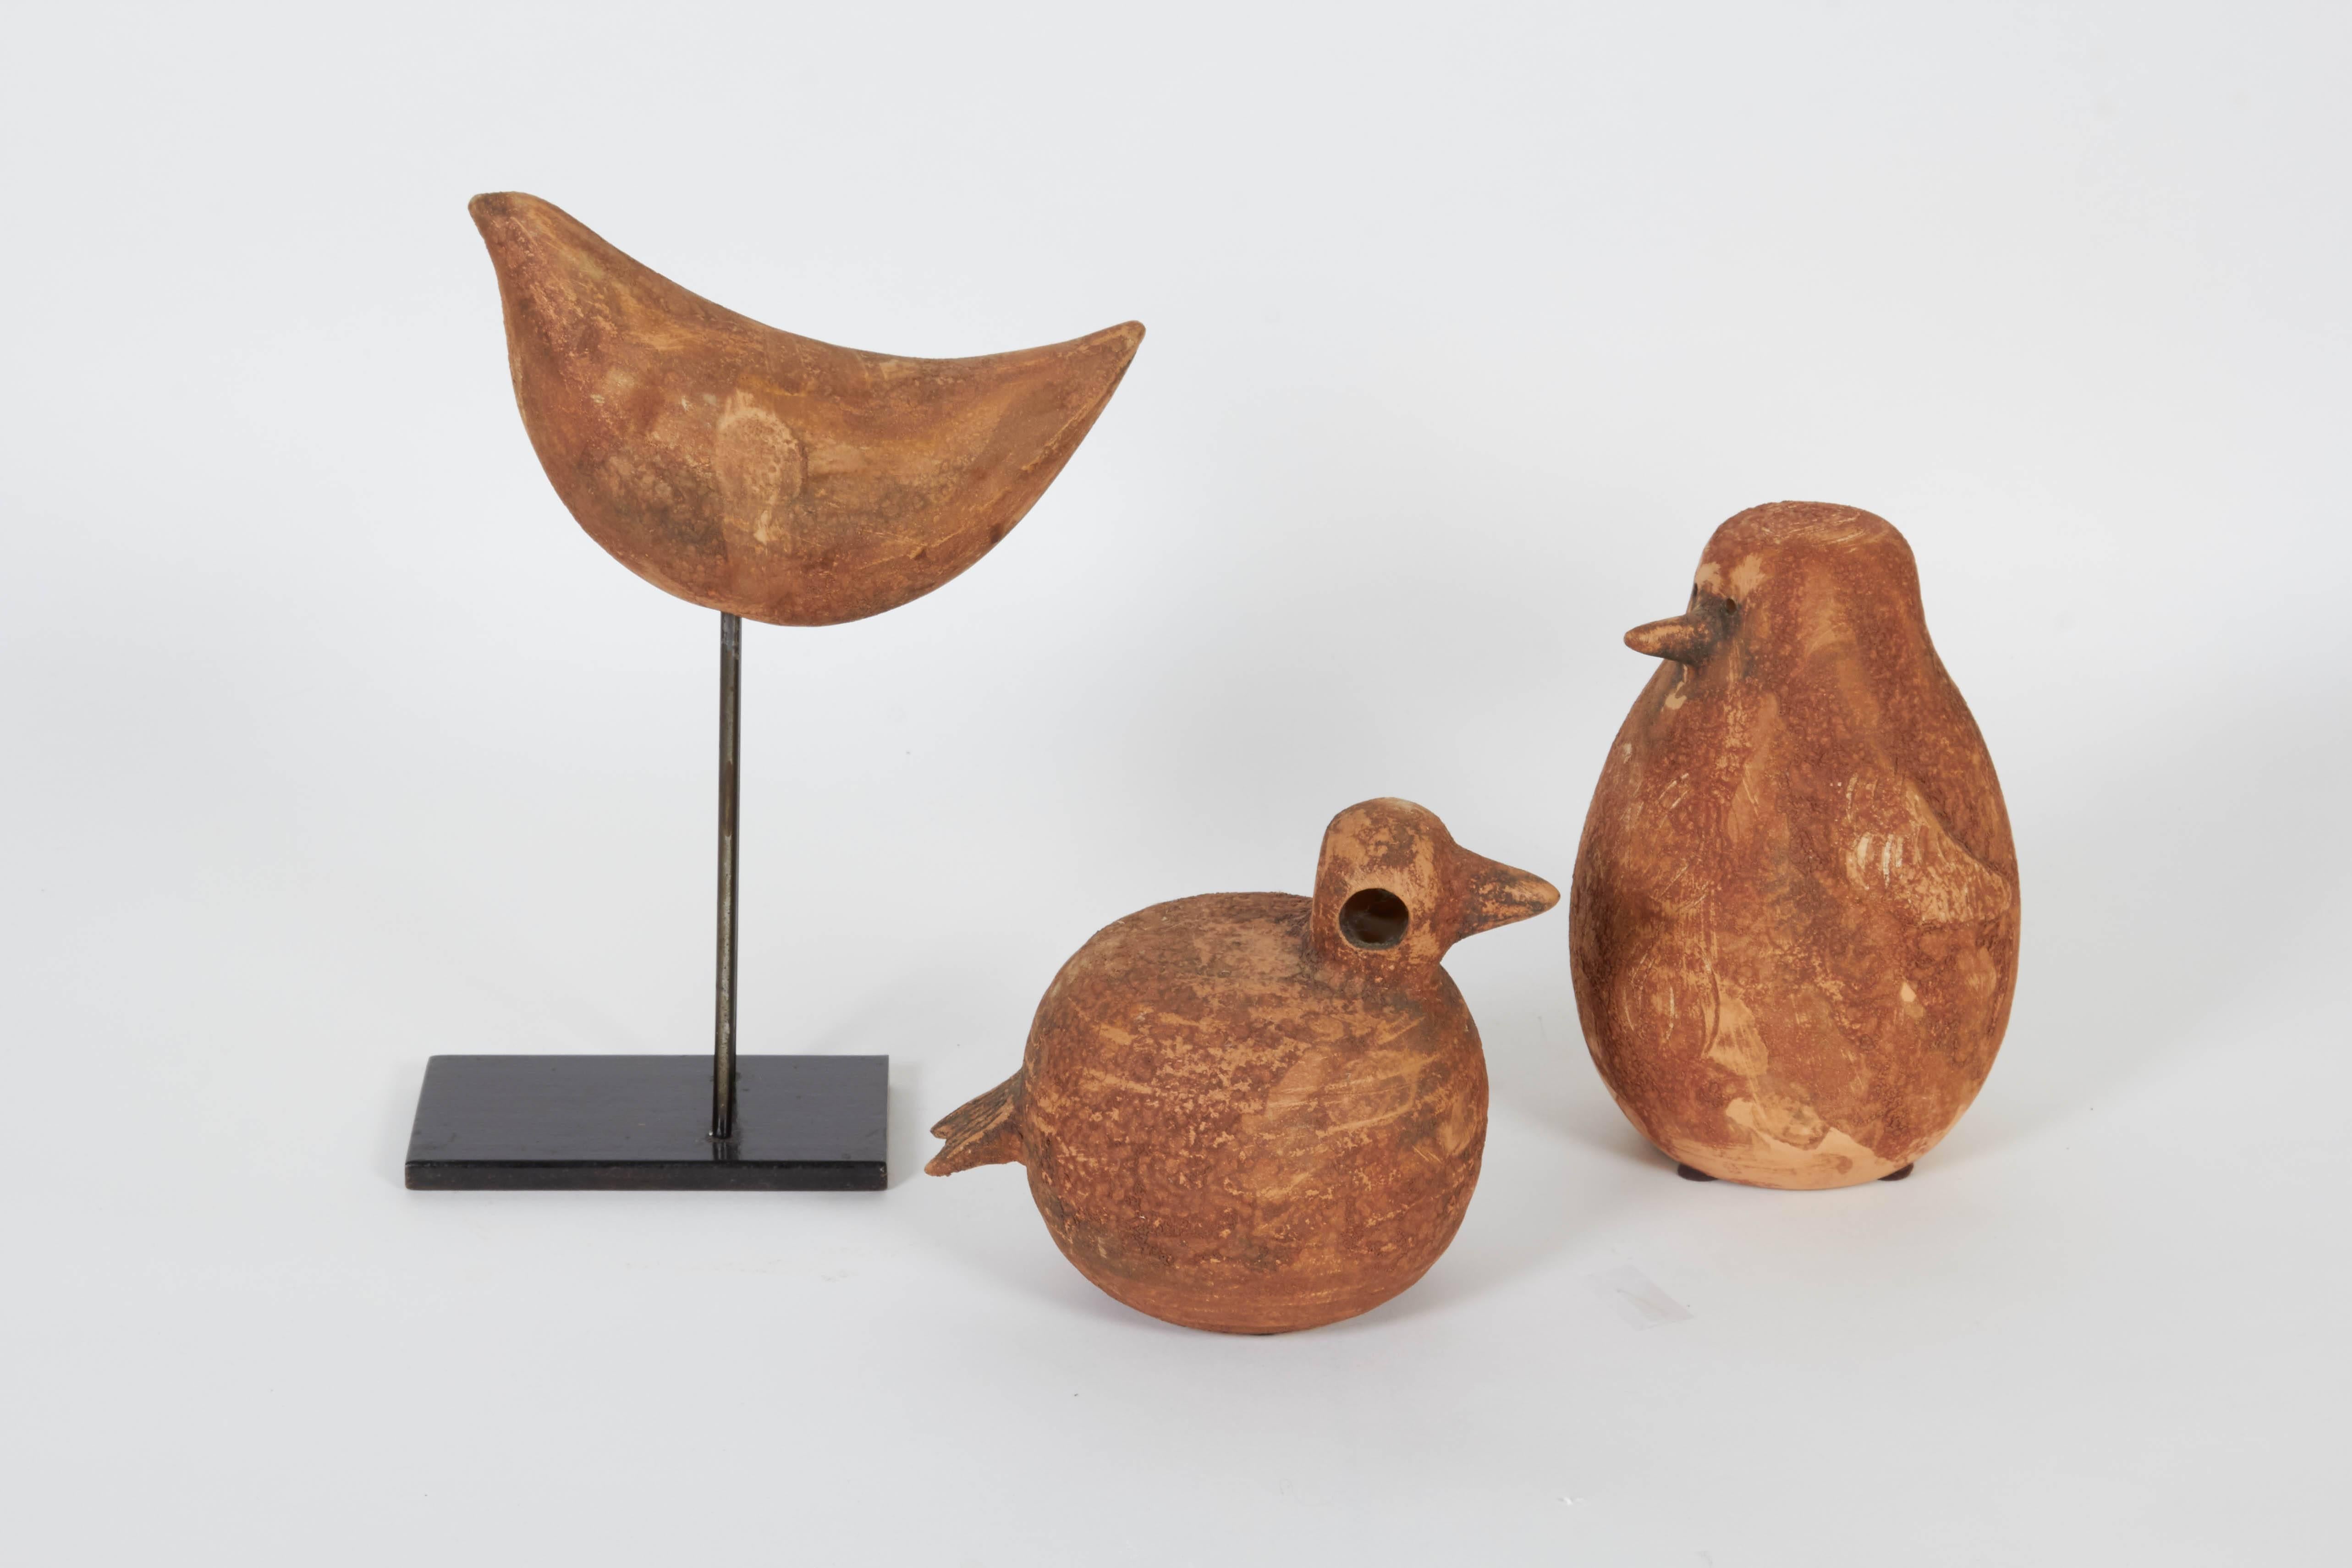 A set of three rare 1960s sculptural ceramic birds by Aldo Londi for Bitossi, imported by Raymor, of modern design in raw terracotta glazes. Includes original Italian labels to underside. Excellent vintage condition.

Individual